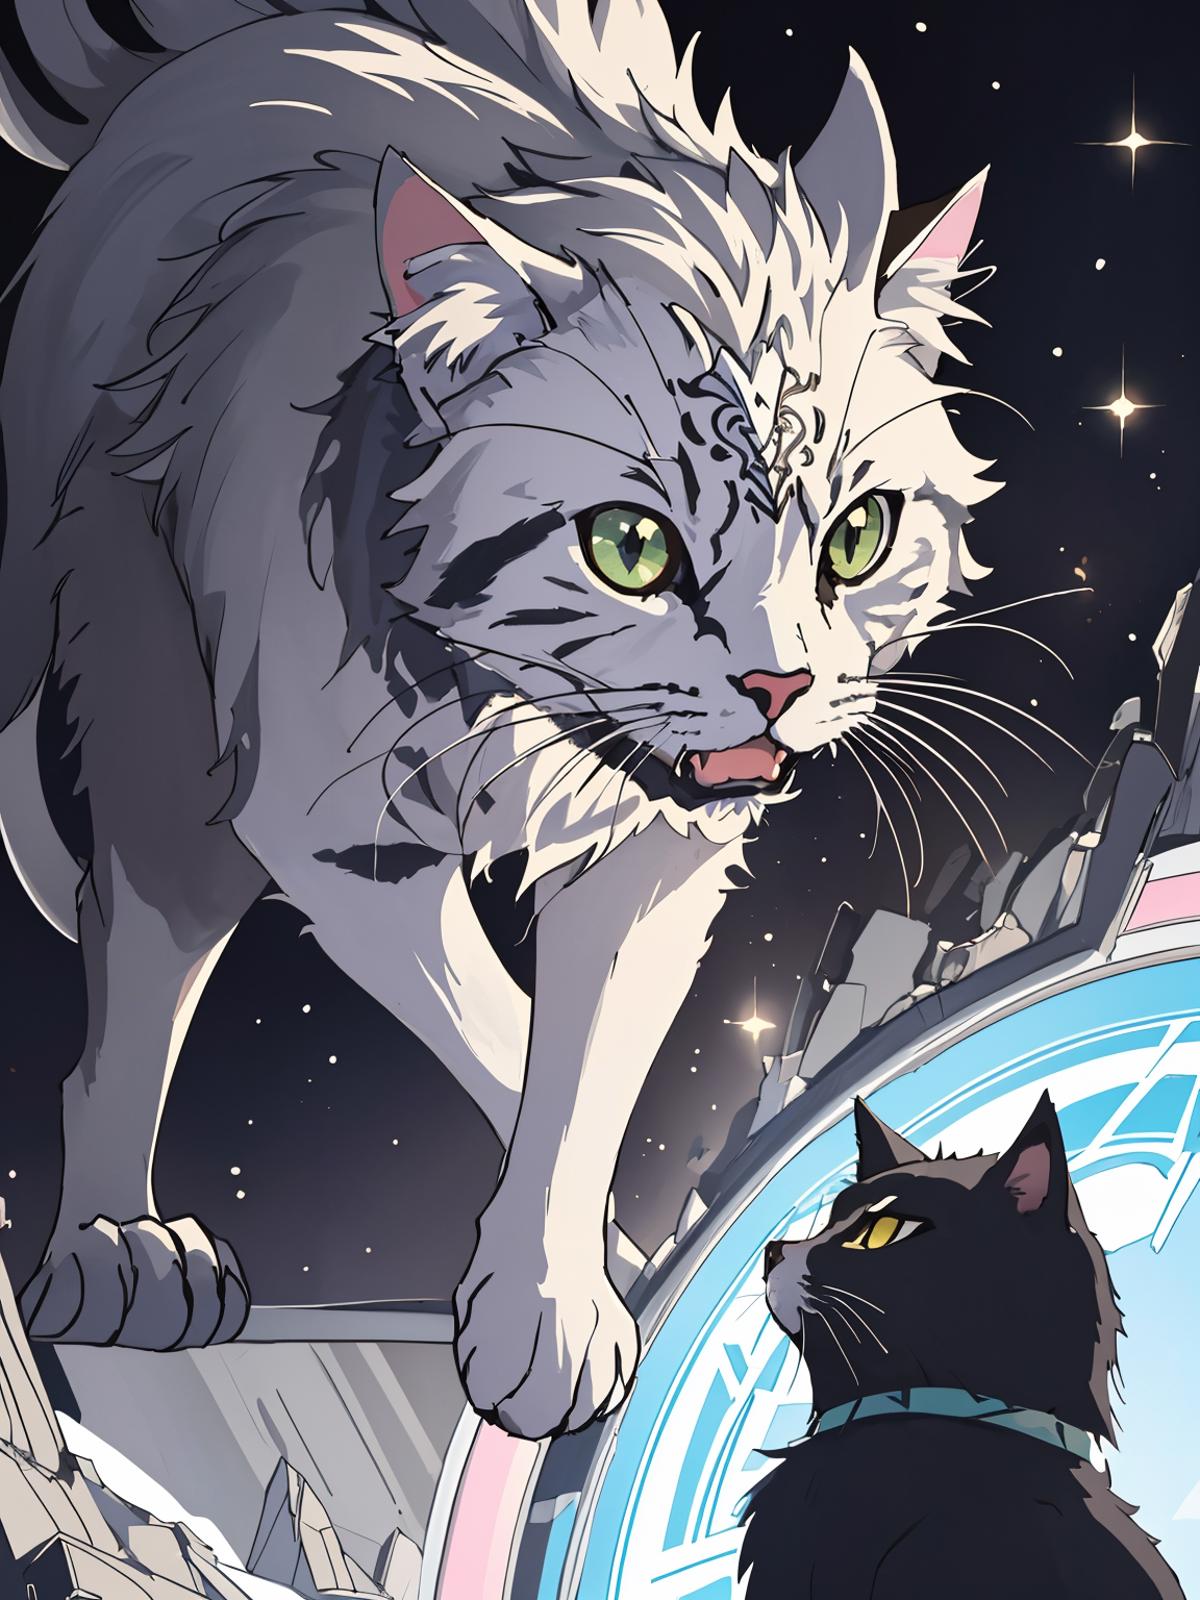 A cat with a green eye and a tiger-striped pattern stands on a spaceship, looking at another cat.